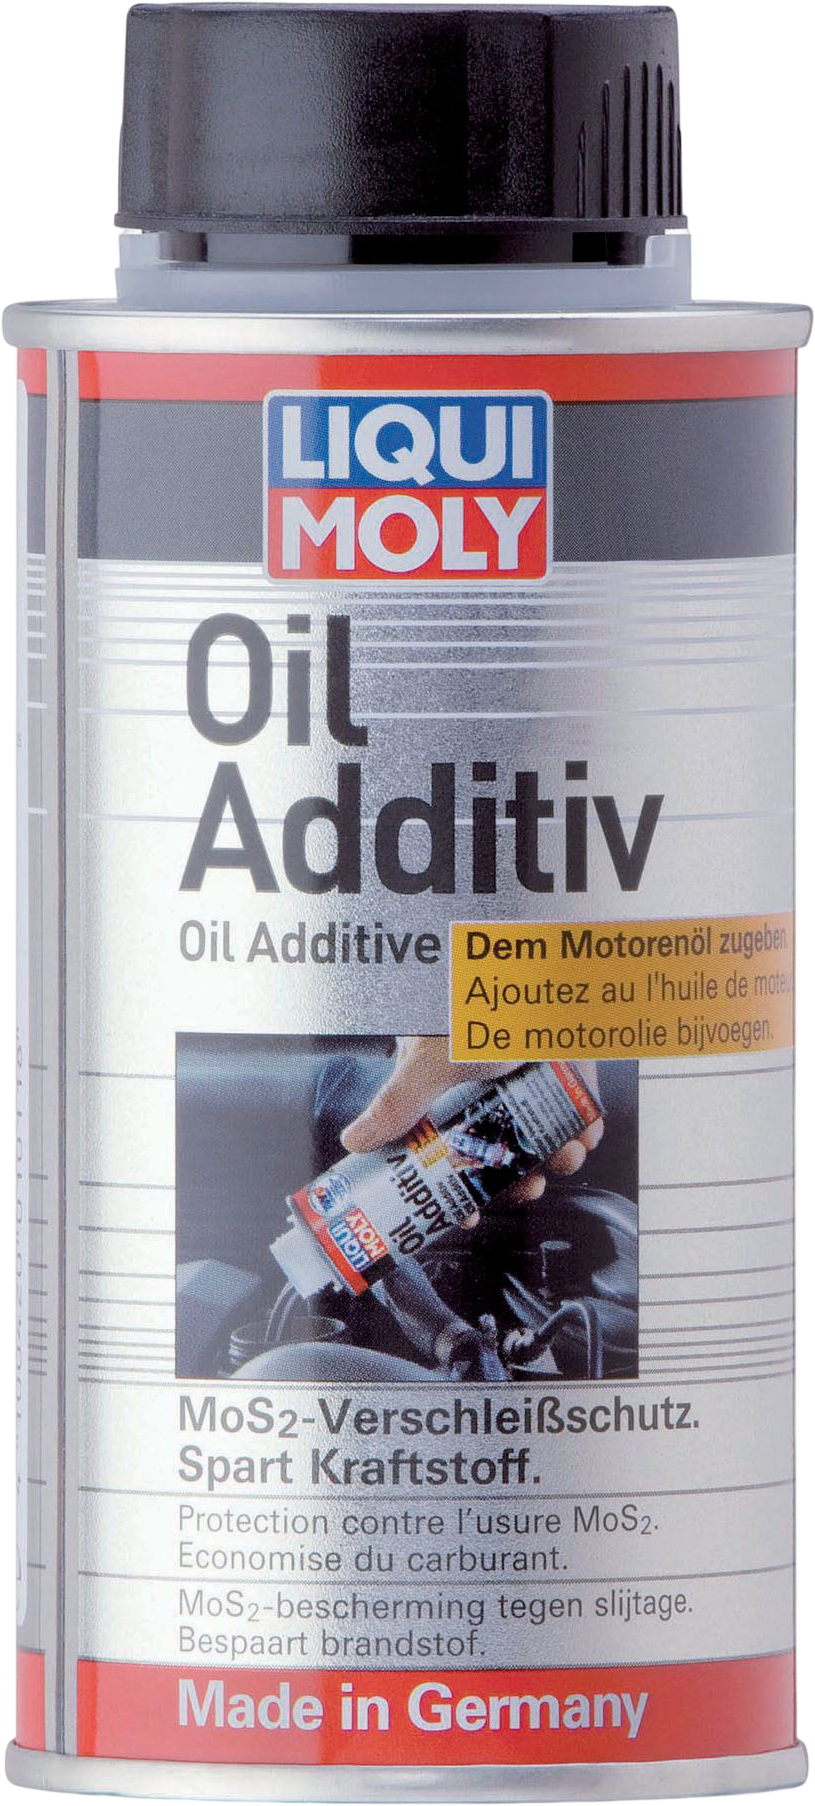 Liqui Moly Oil Additive, 125 ml (OUTLET)